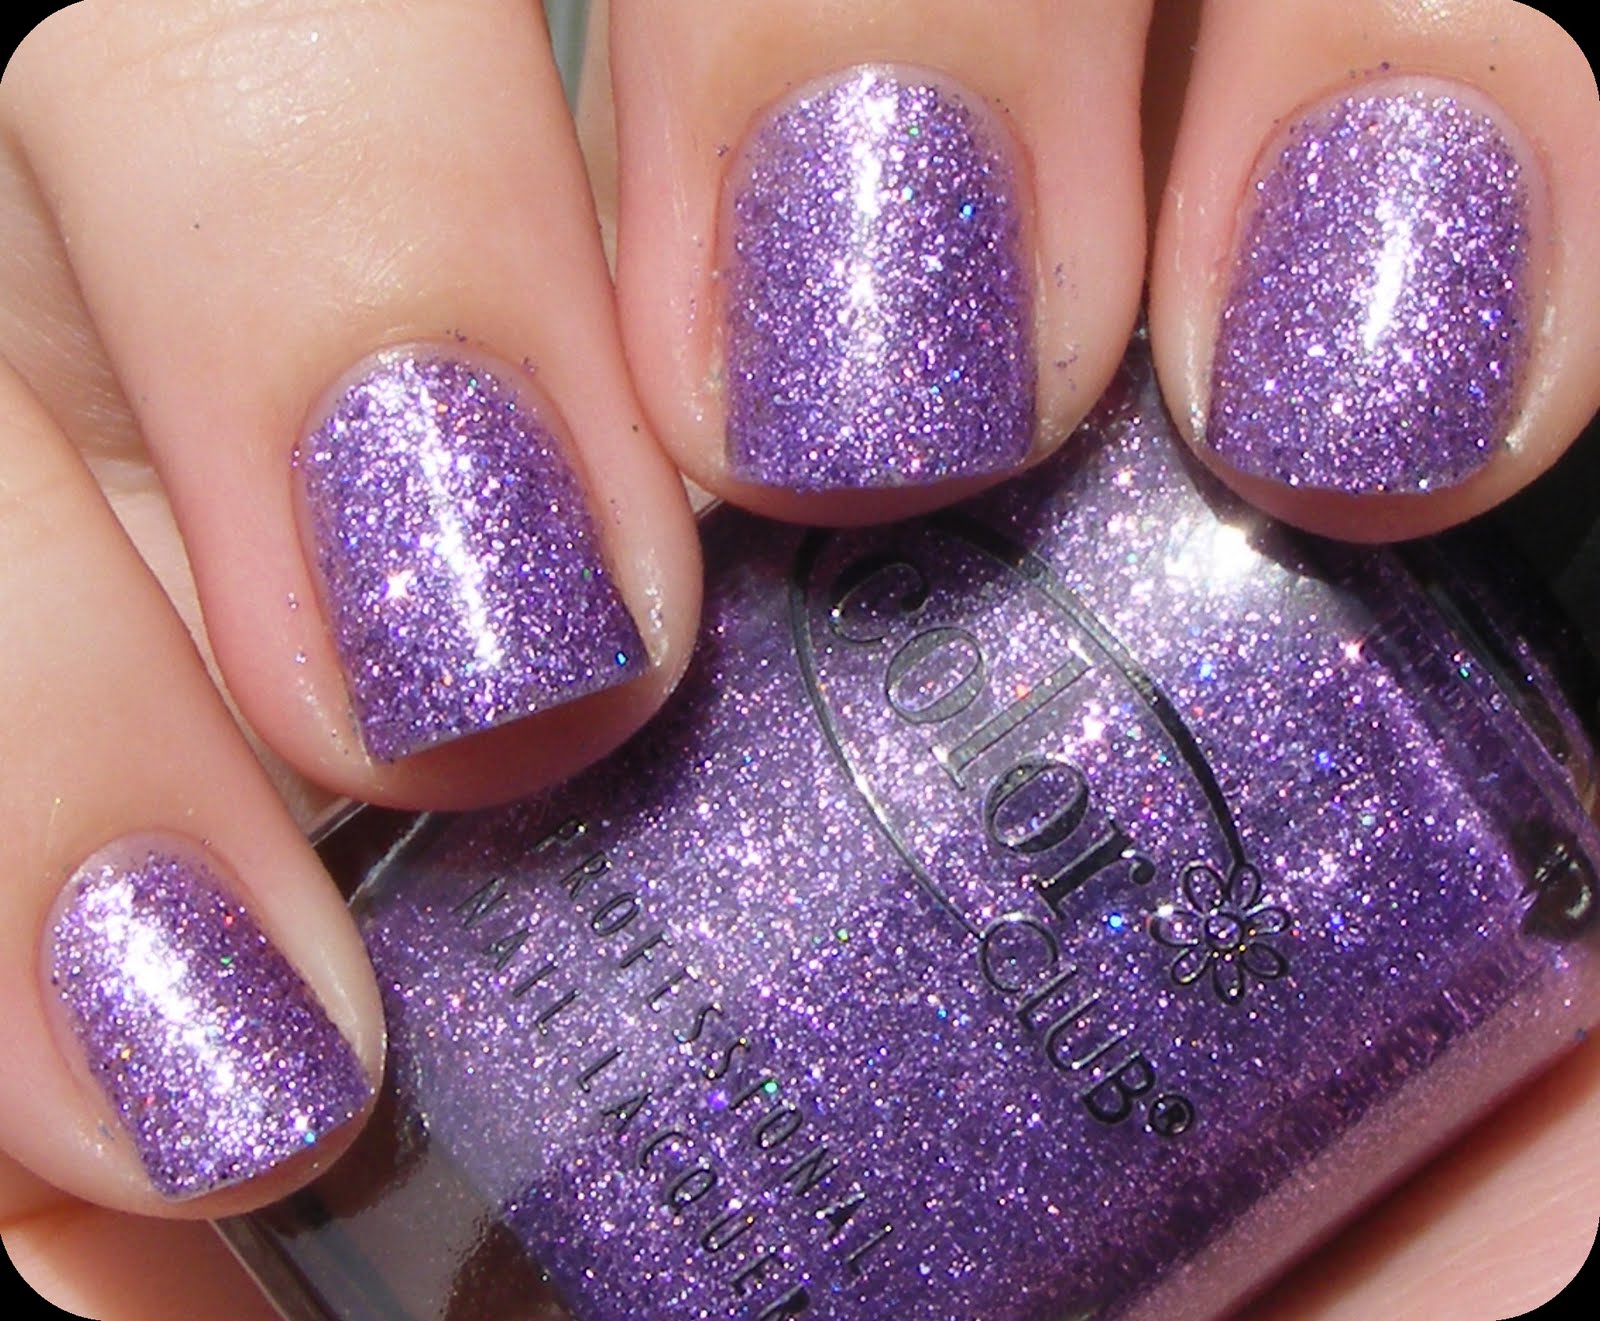 6. "Everlasting Lilac" by Revlon - wide 10